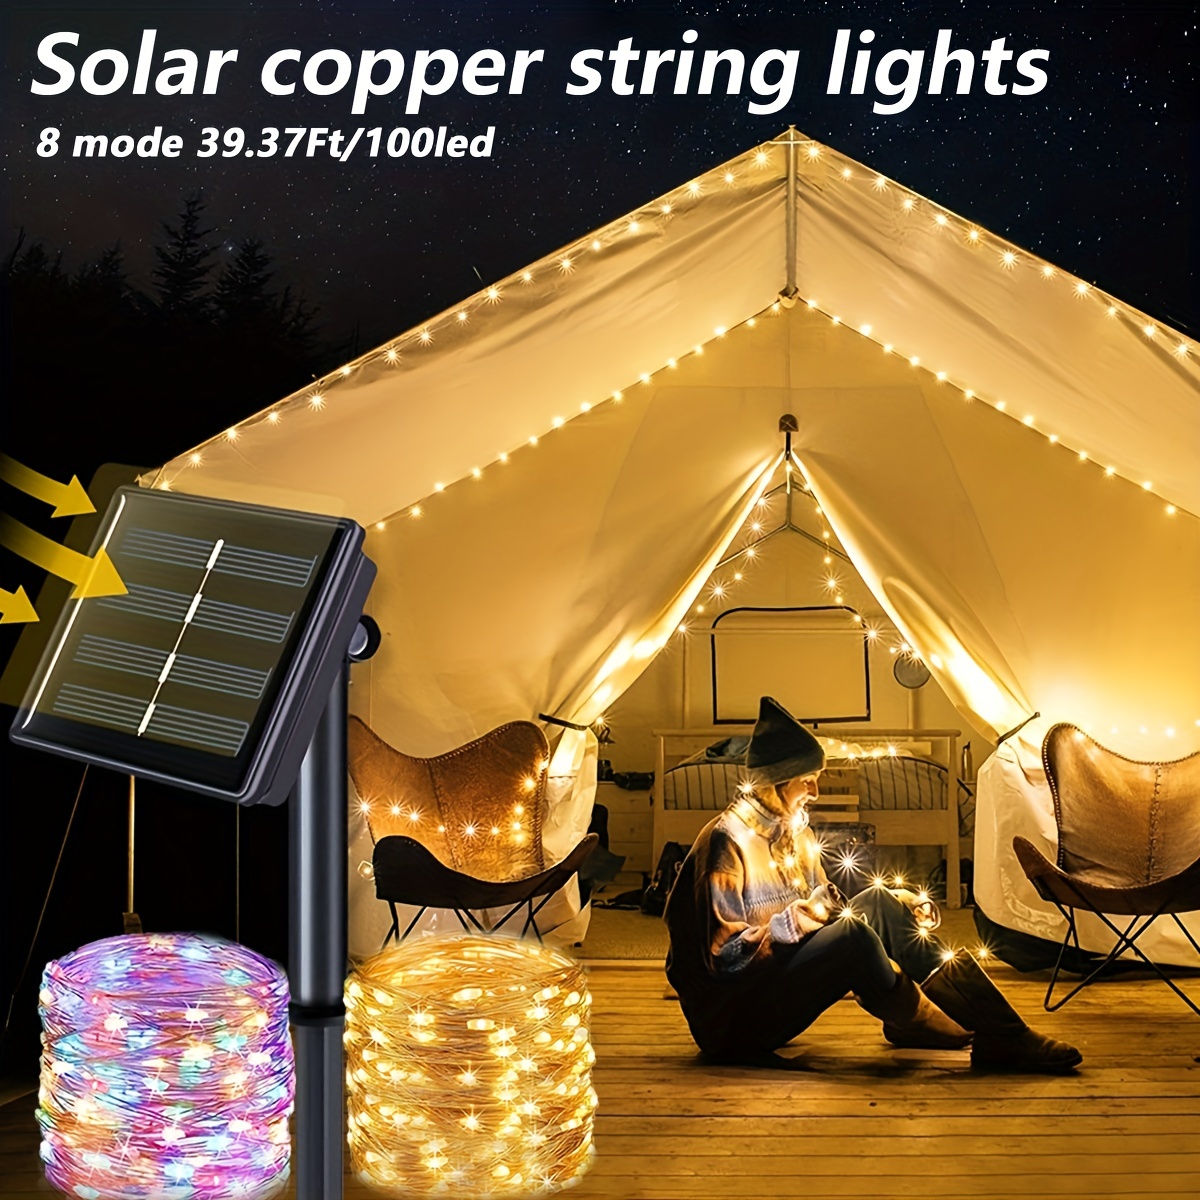 Guirlande solaire Firefly String Lights 100 LED blanc chaud